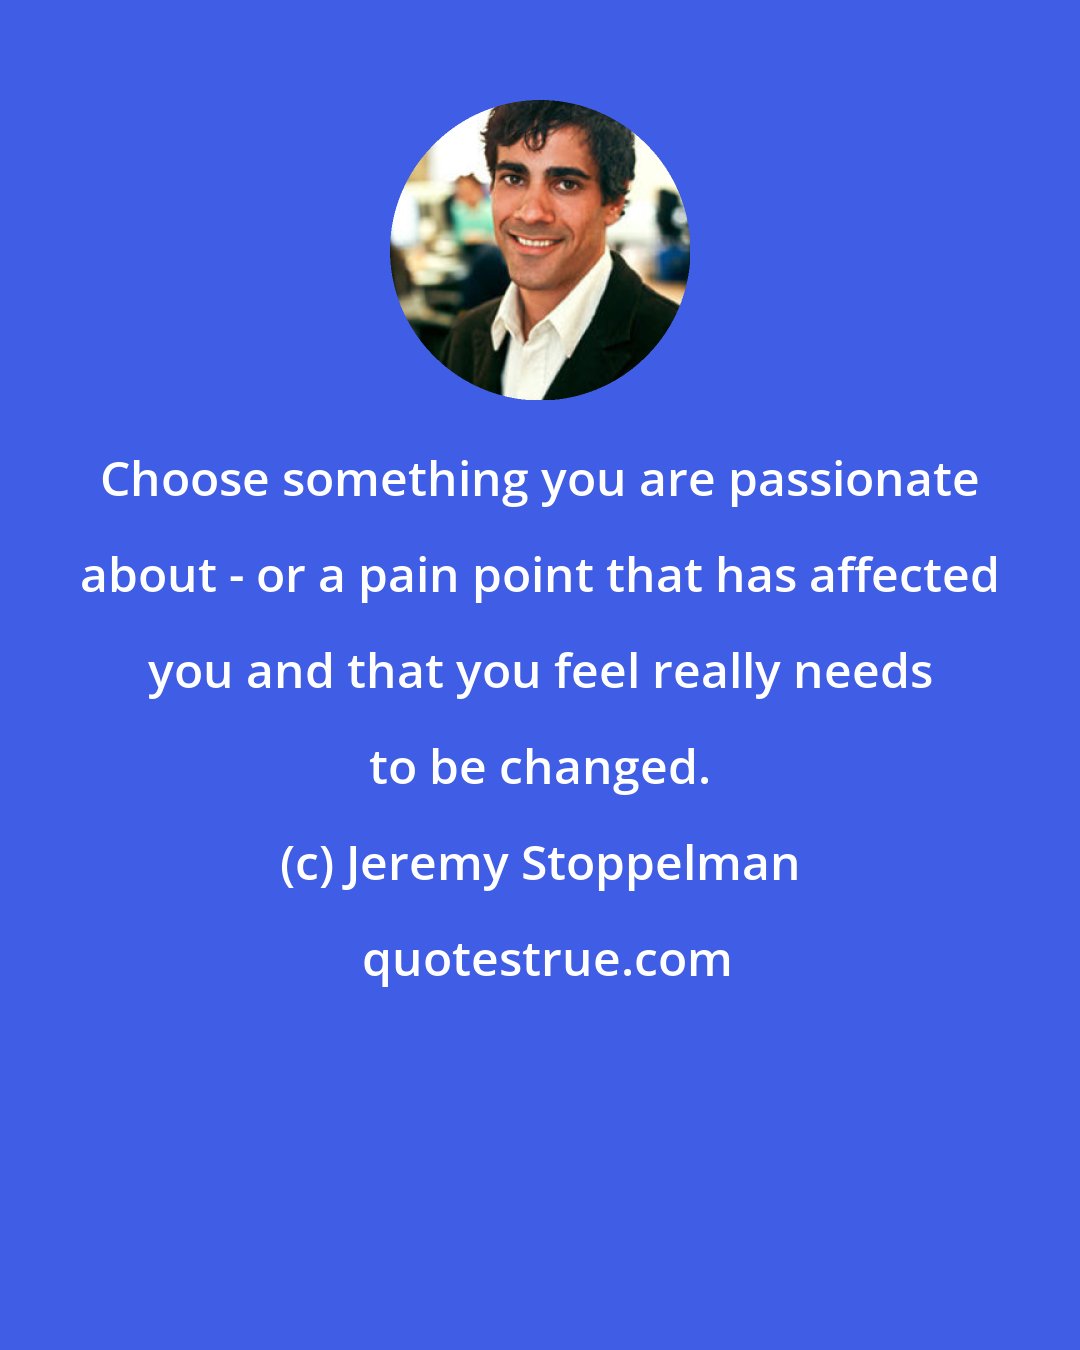 Jeremy Stoppelman: Choose something you are passionate about - or a pain point that has affected you and that you feel really needs to be changed.